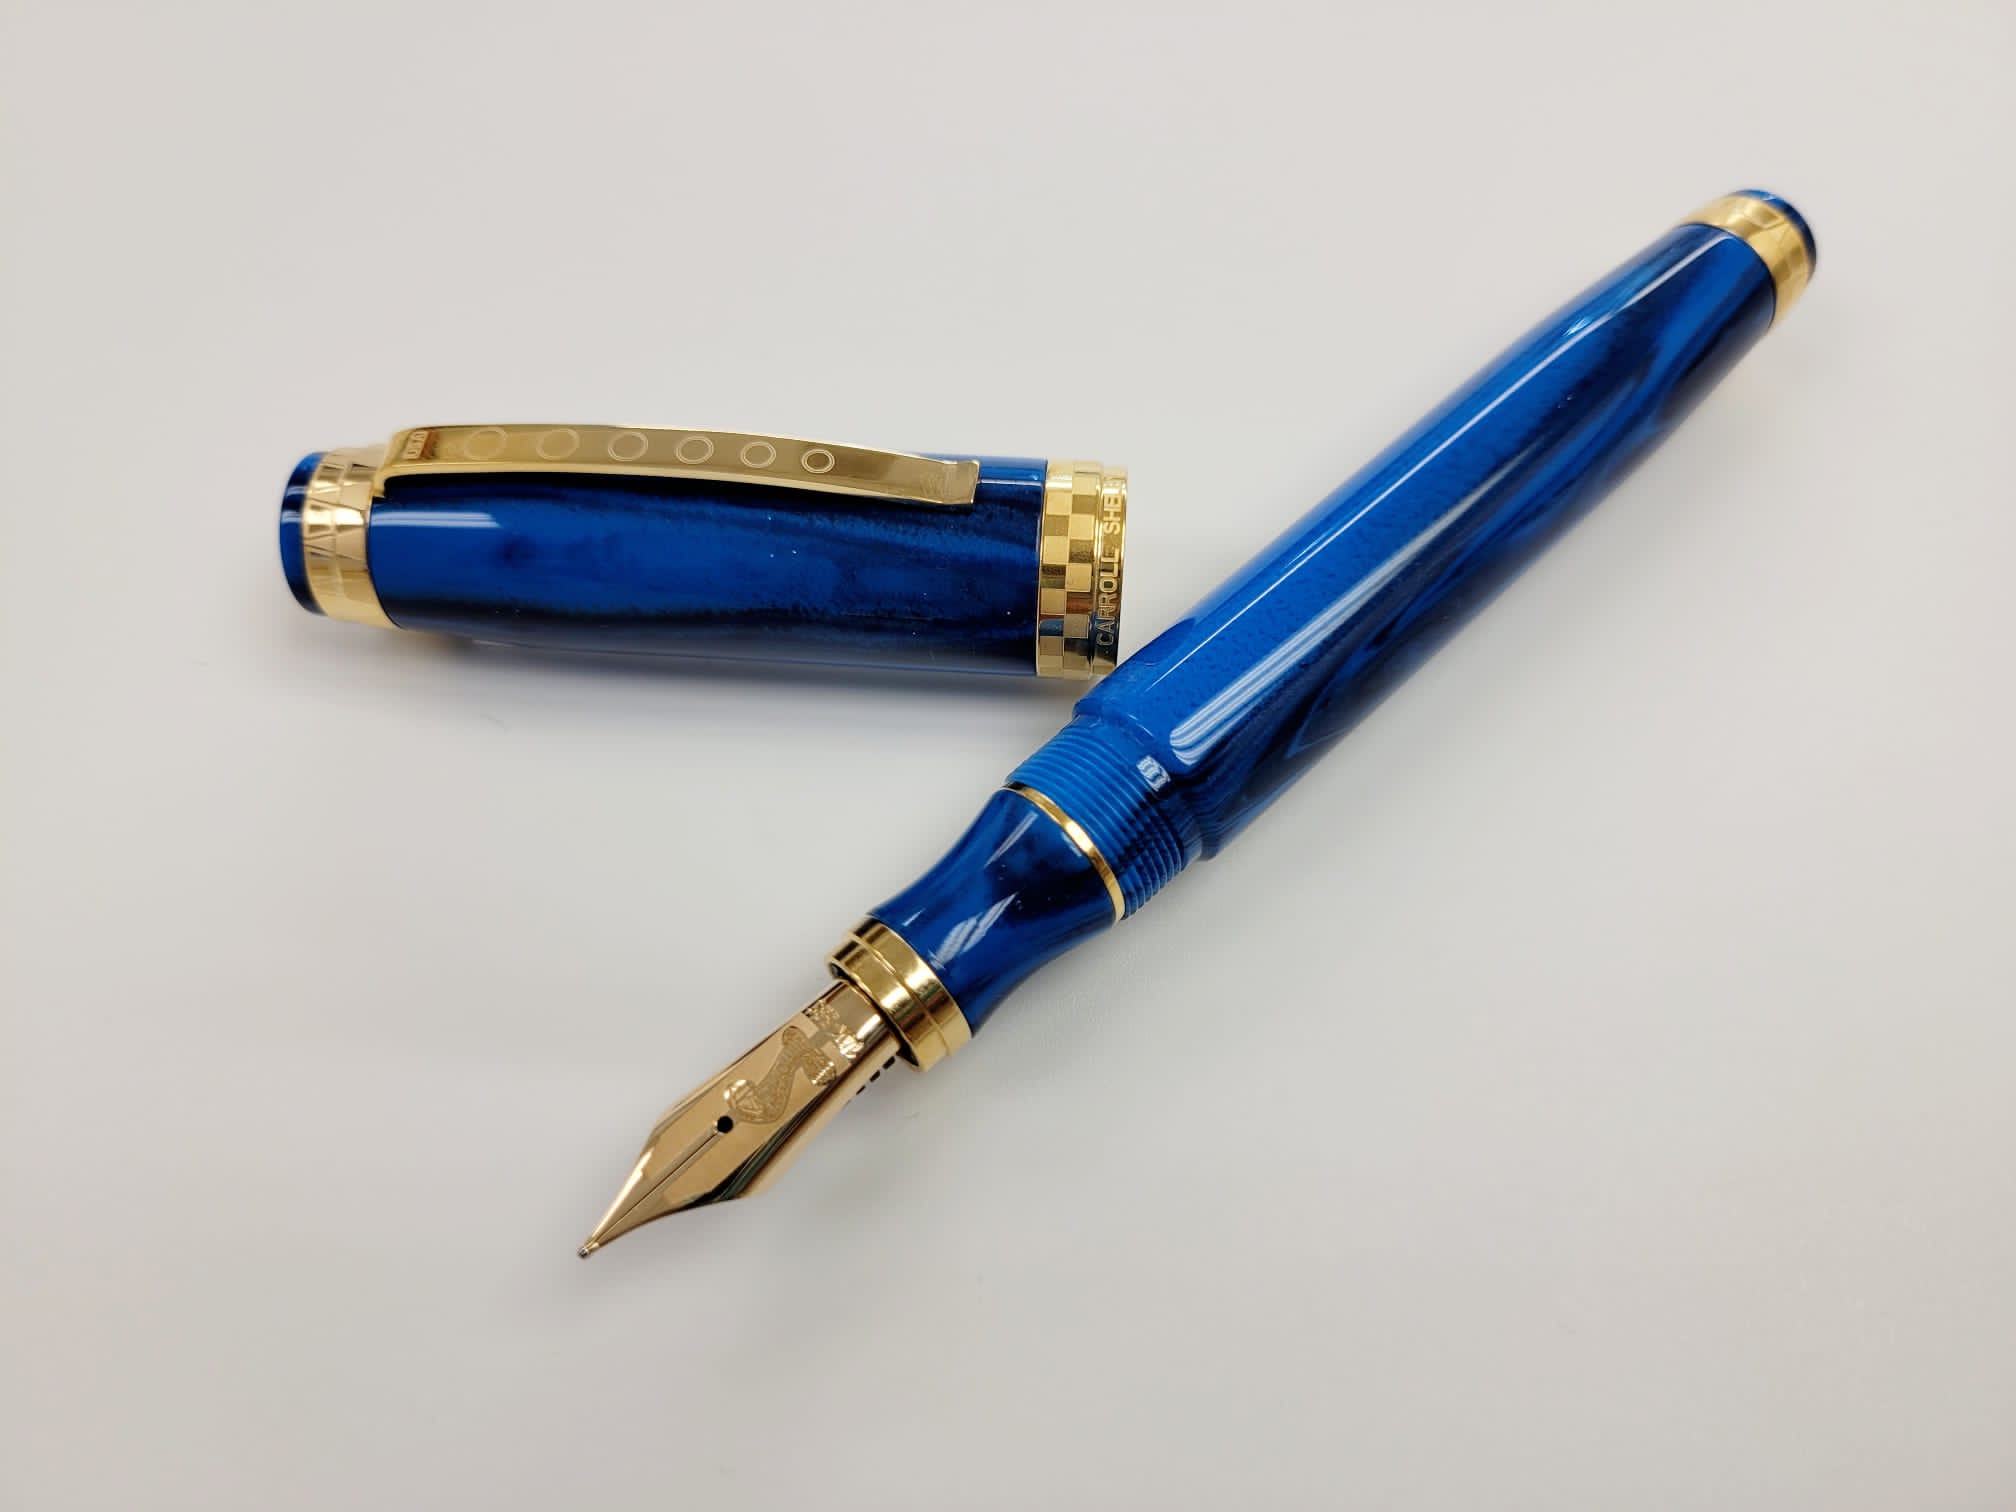 Bexley Carroll Shelby 427 Cobra - Gold Trims 27 Pens Only!